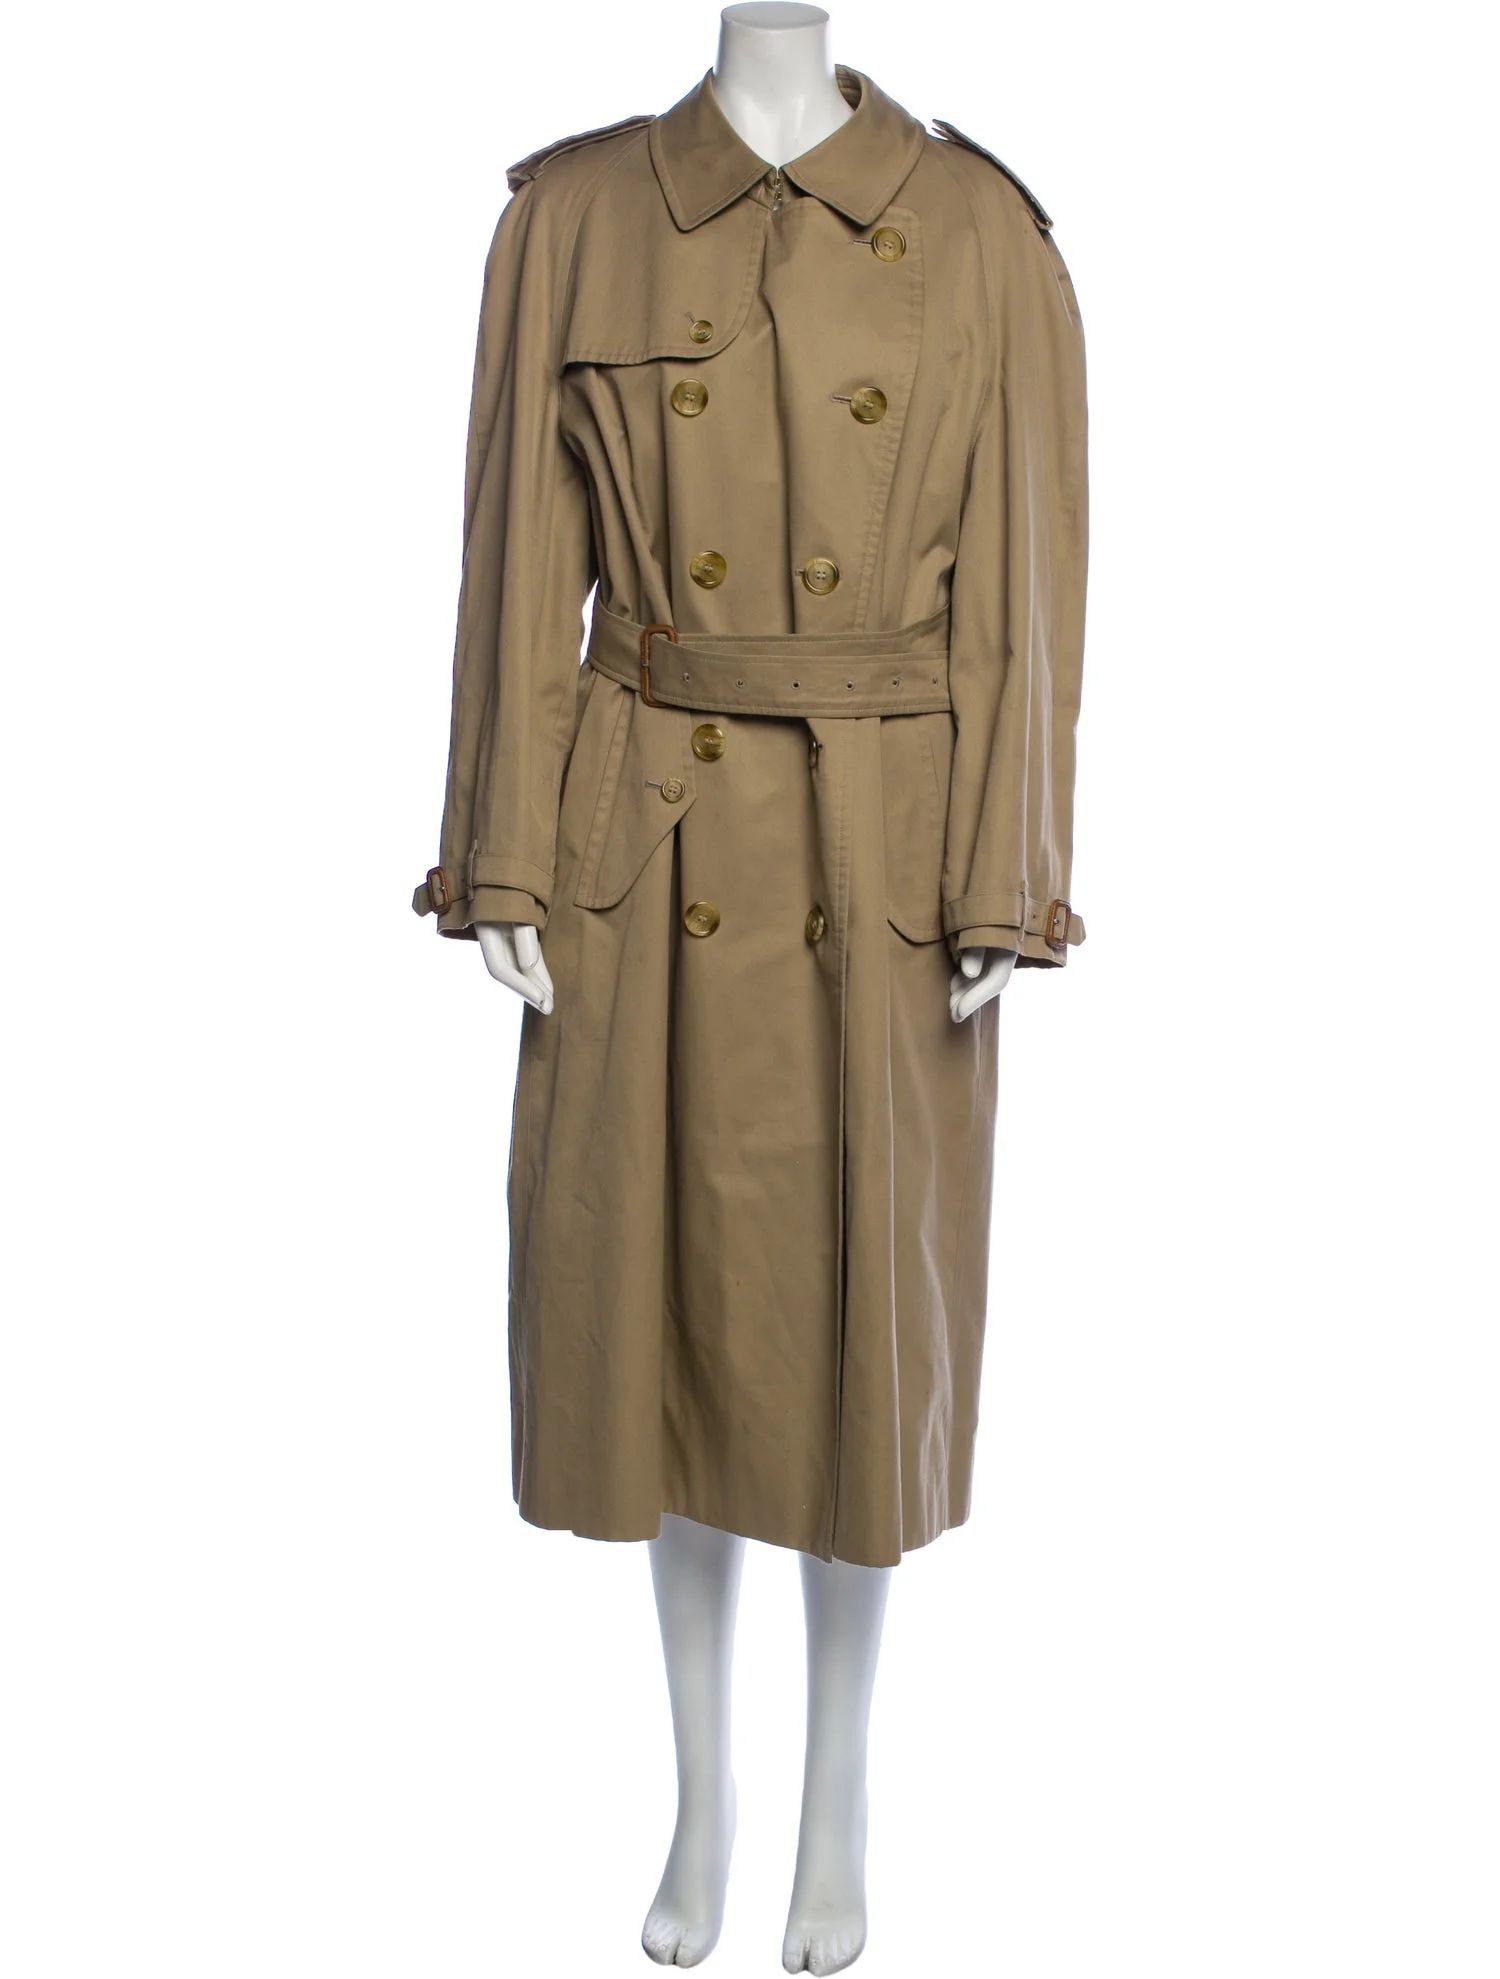 Burberry's Trench Coat | The RealReal